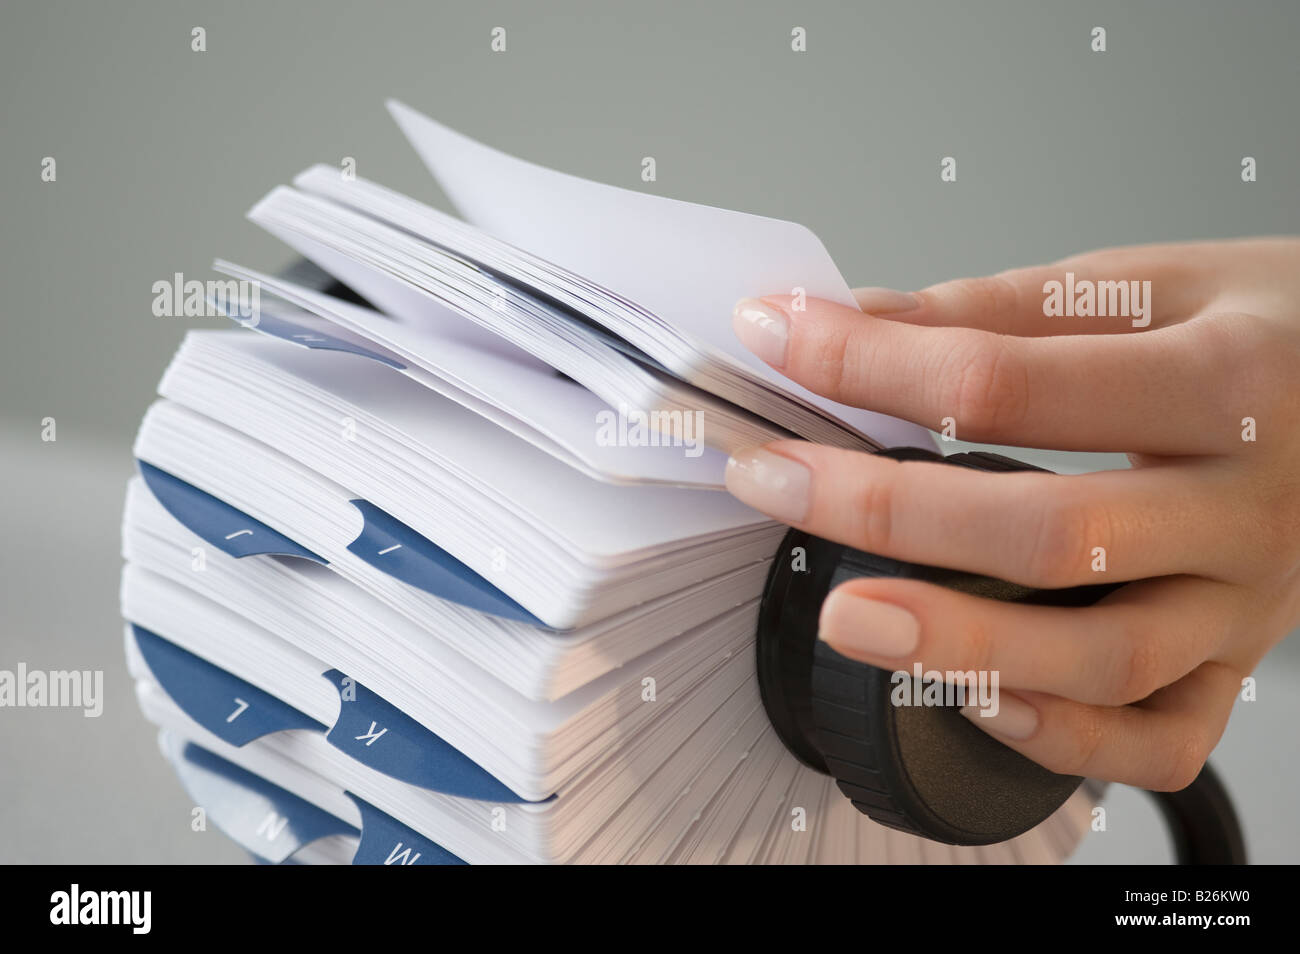 Woman holding card au rotary card file Banque D'Images